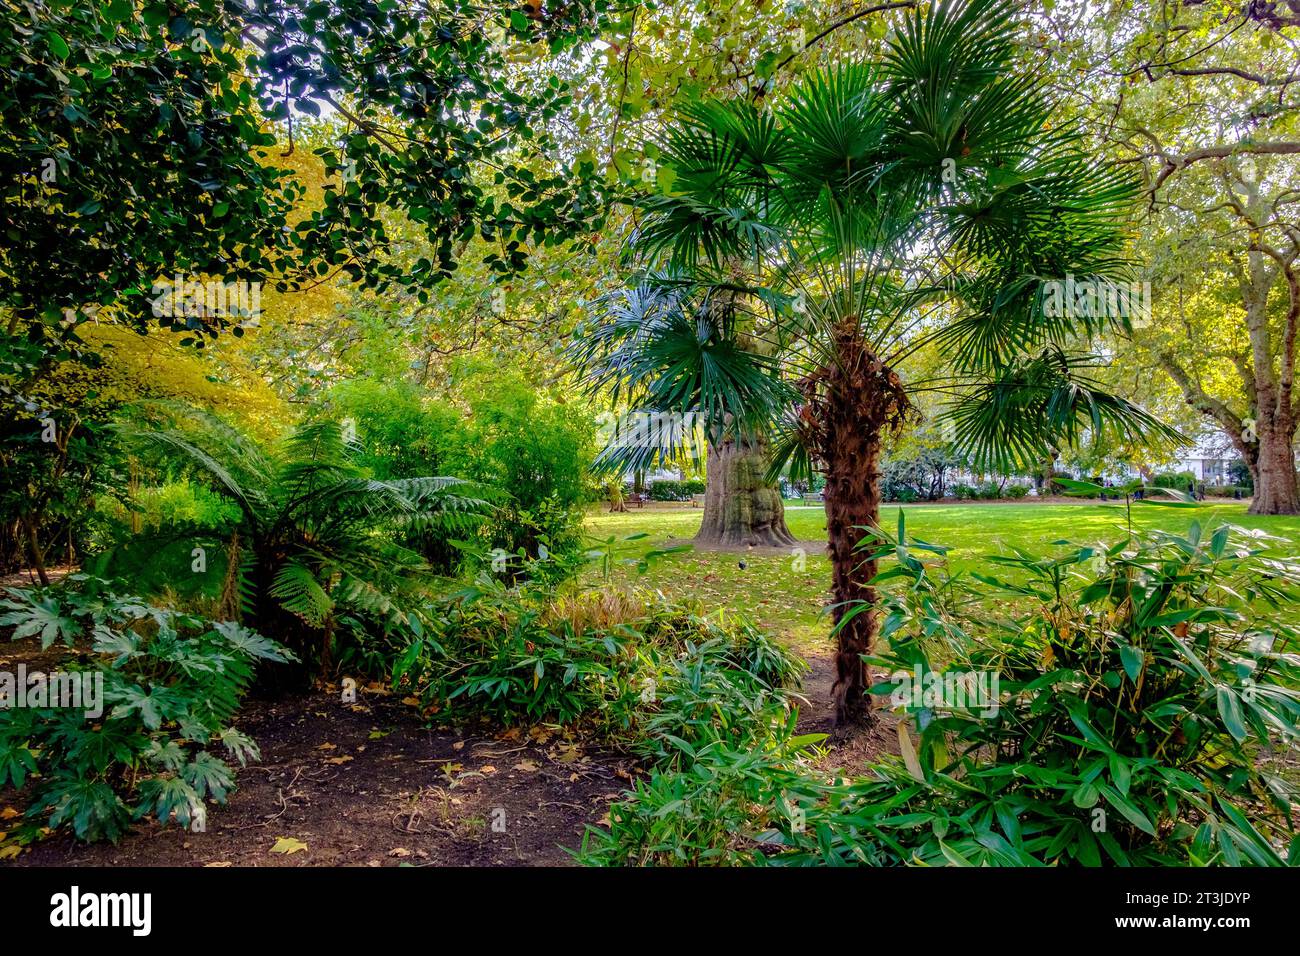 Sub-tropical plants and trees in Lincoln's Inn Fields, London, UK Stock Photo